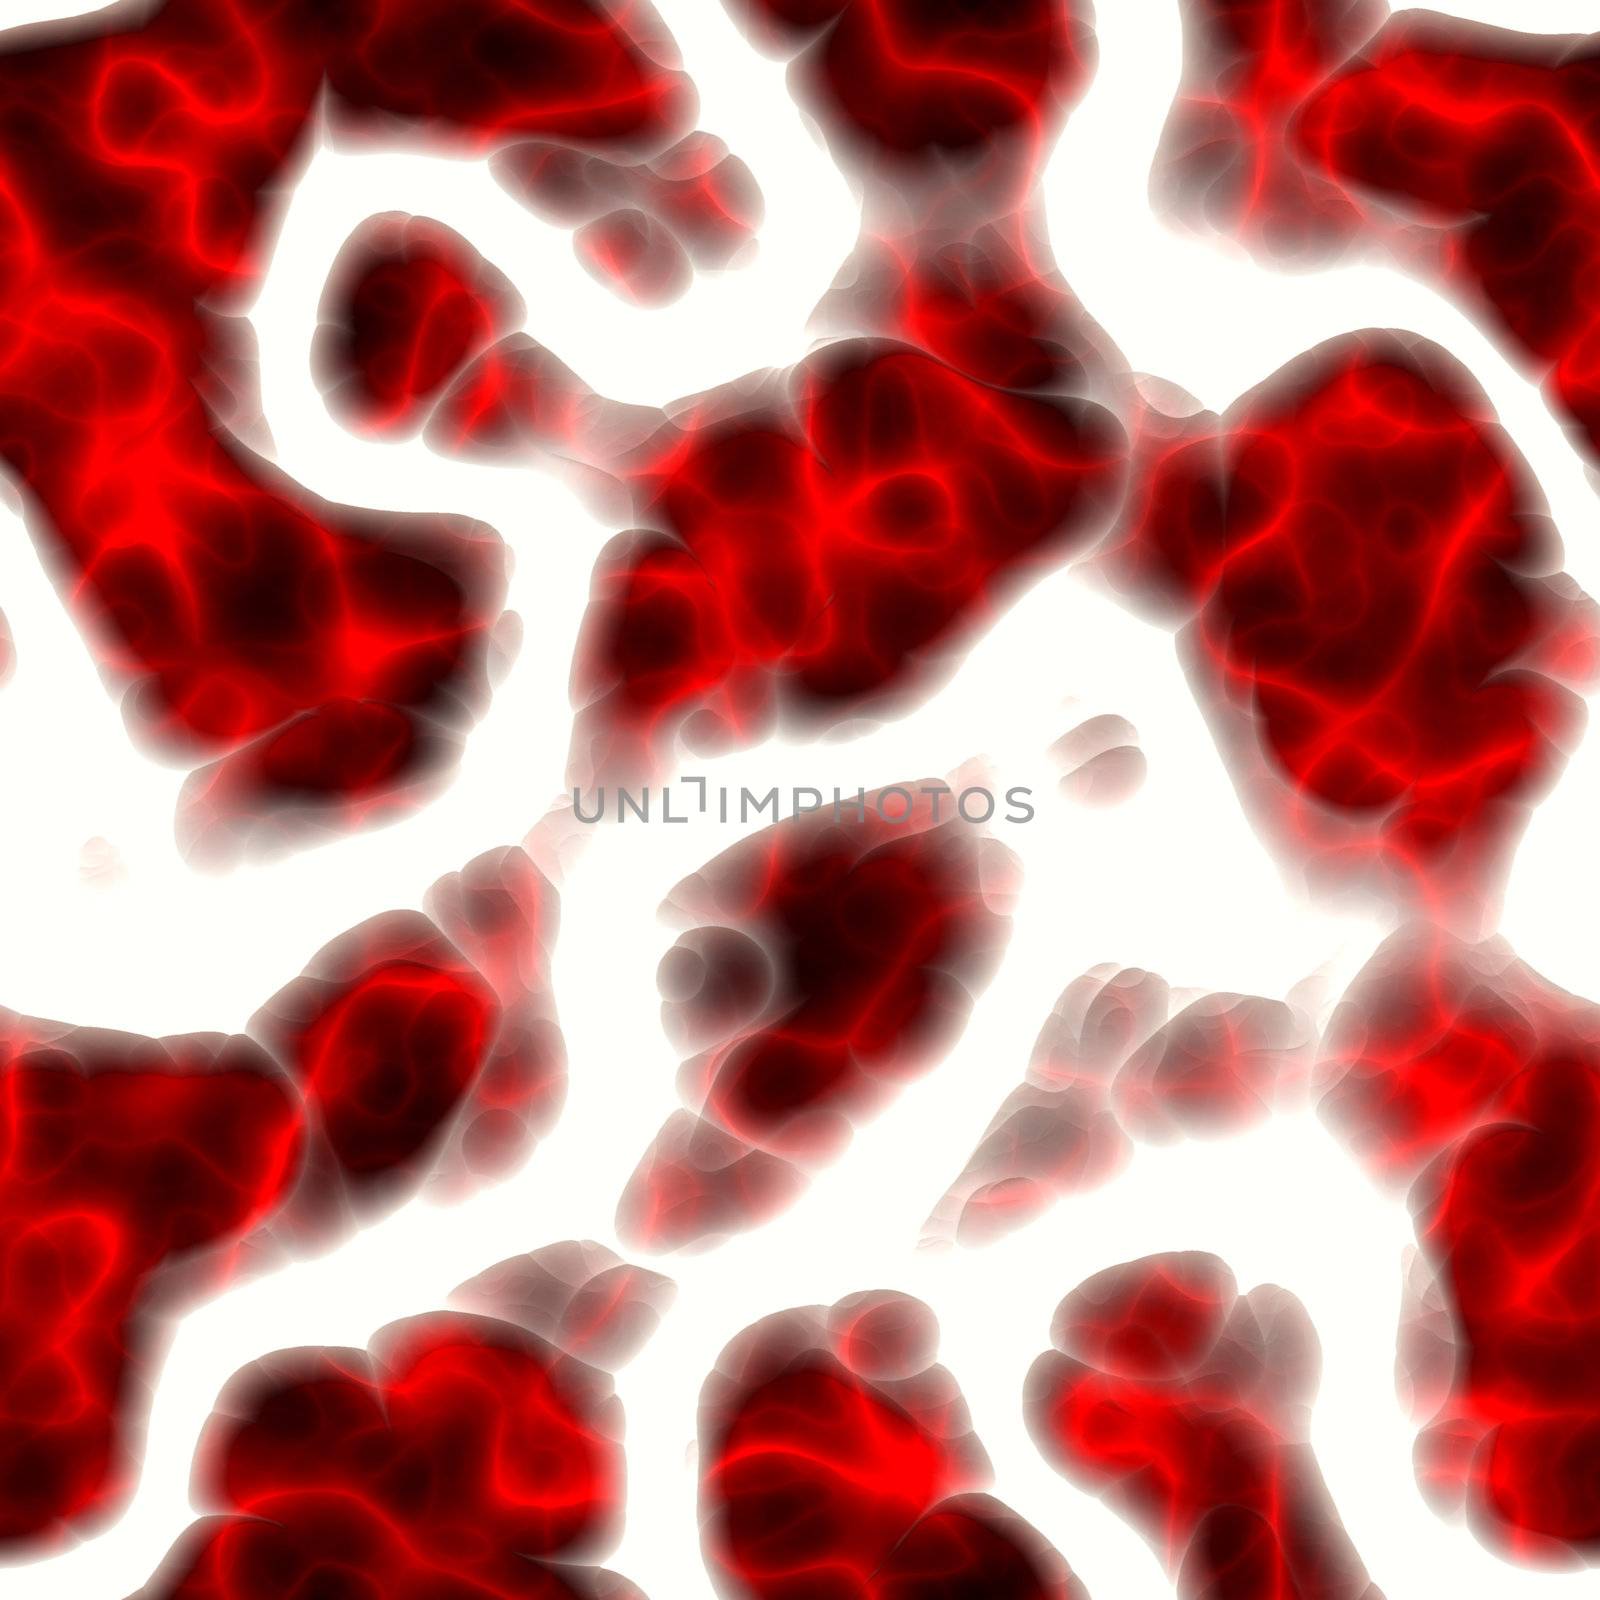 A 3d render of some blood cells or plasma, isolated over white.